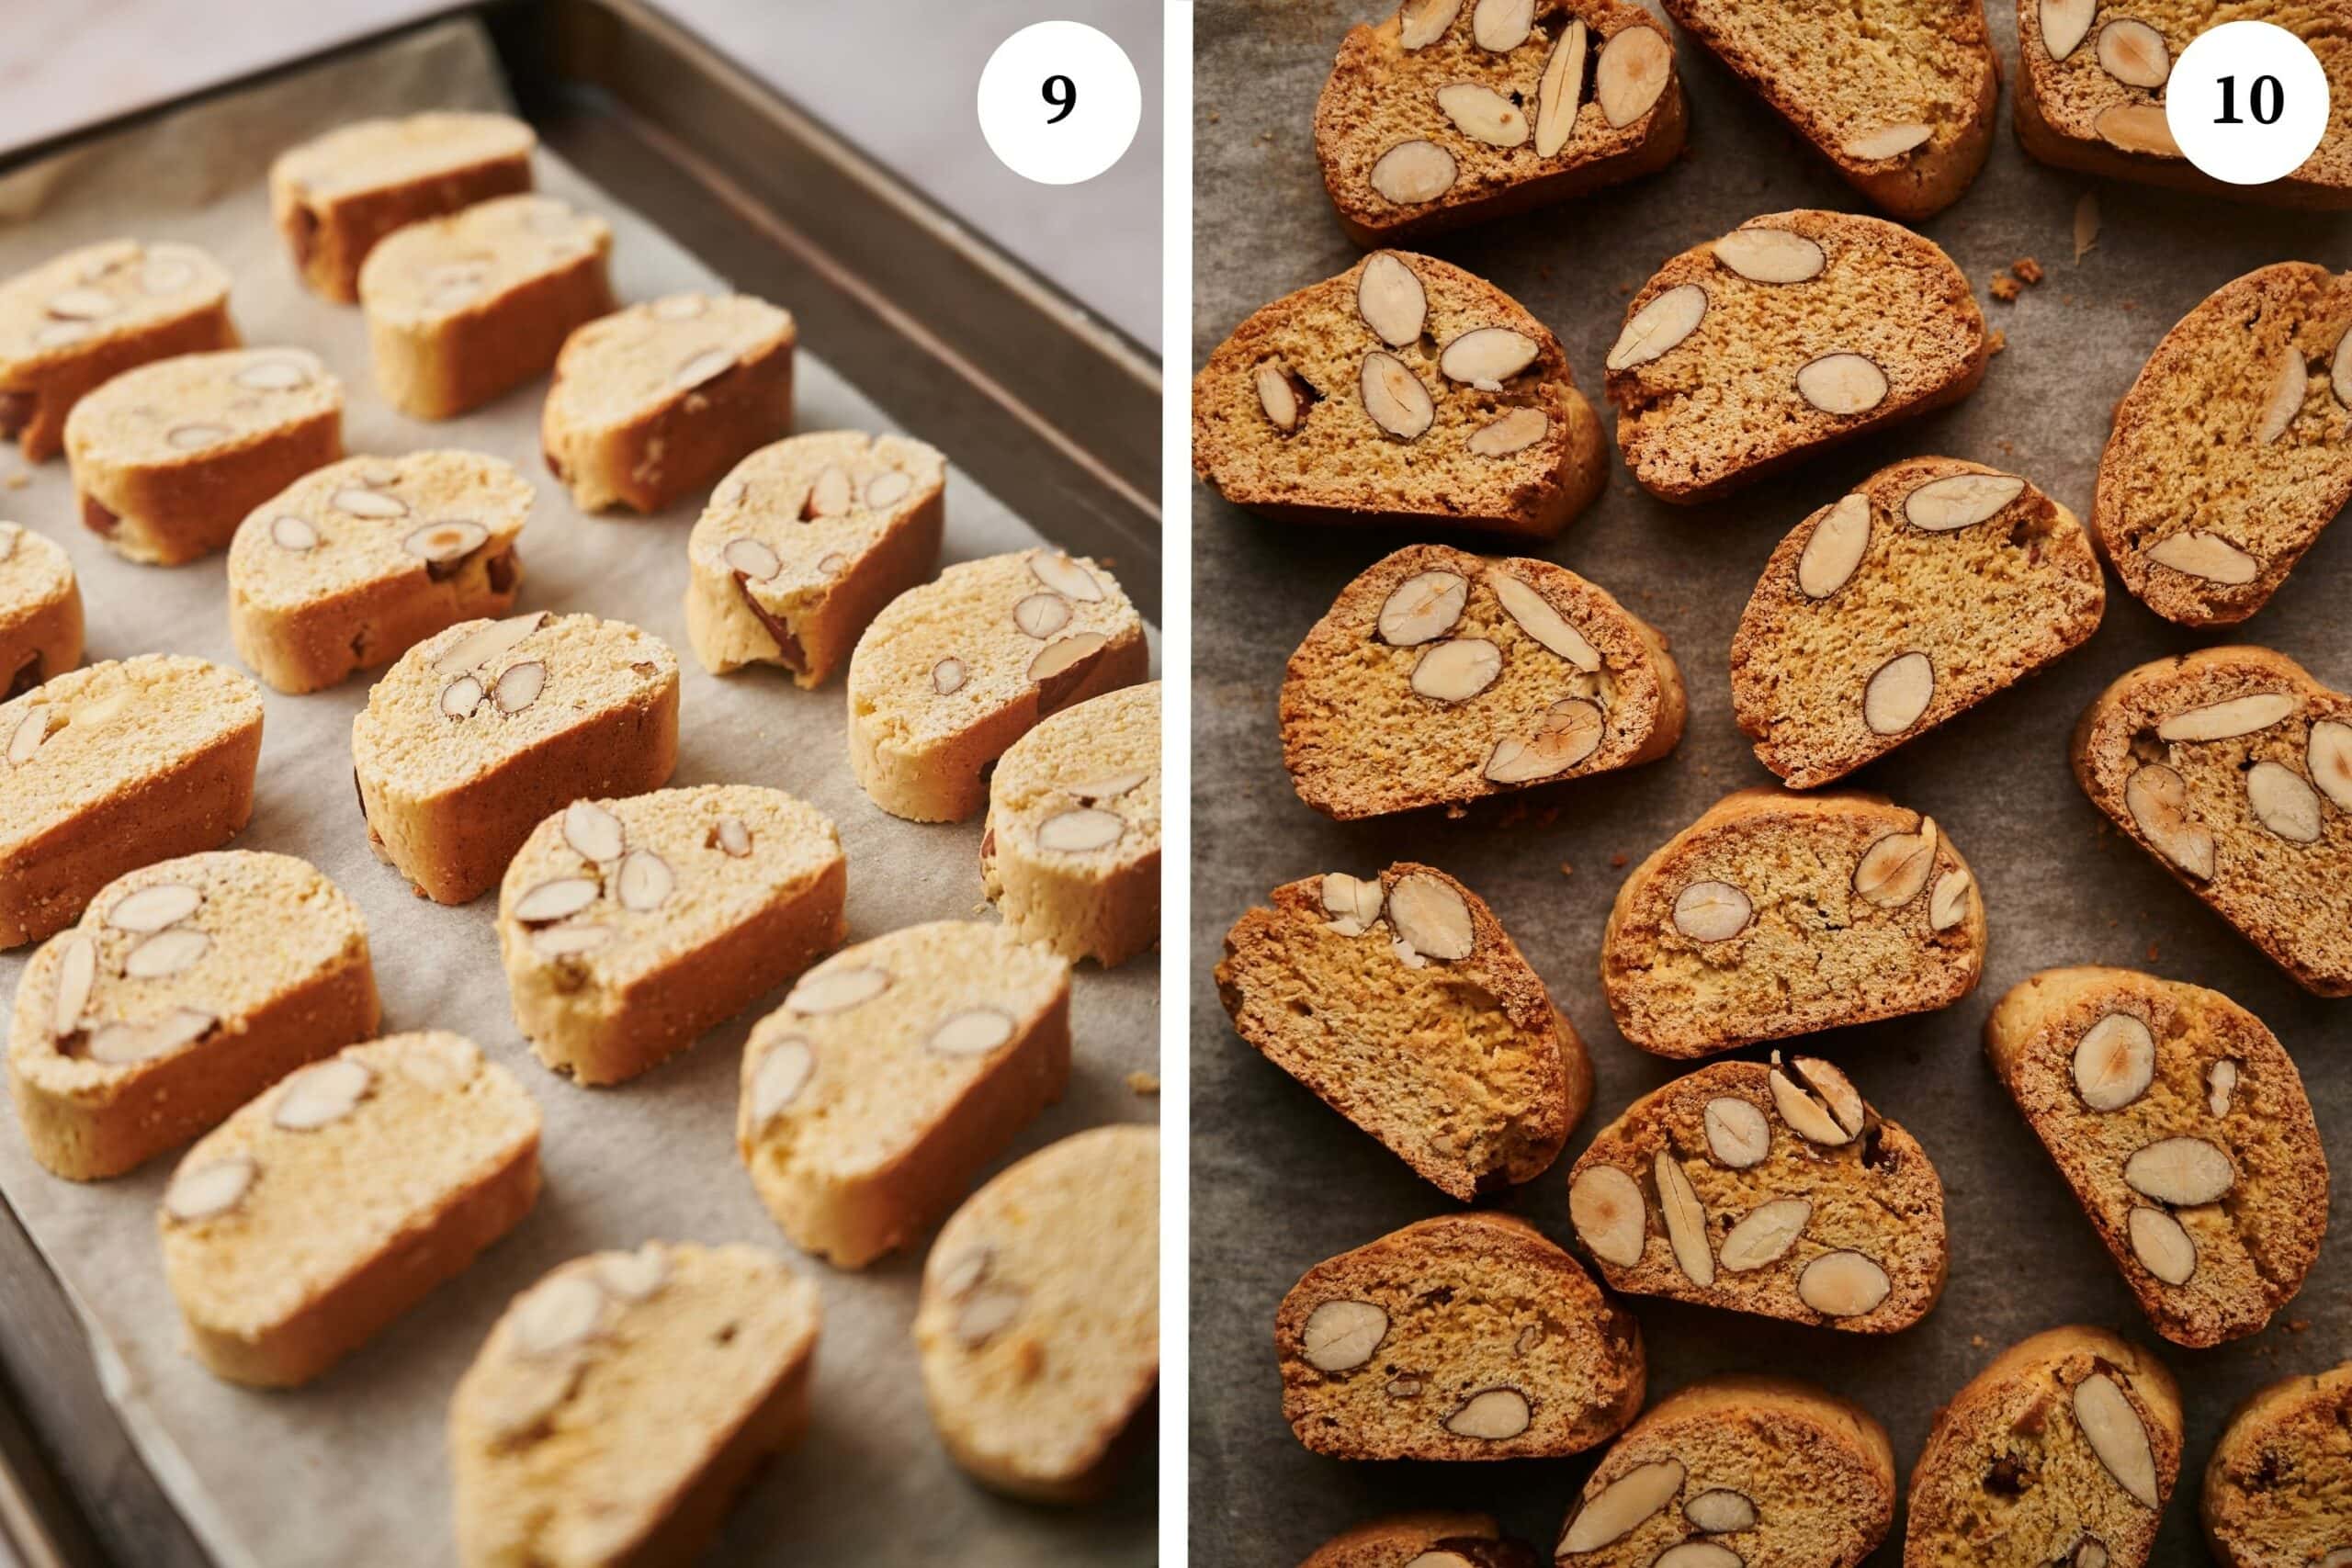 place the slices biscotti slices on the oven tray and put them in the oven for a second time. Then take them out and let them cool before serving